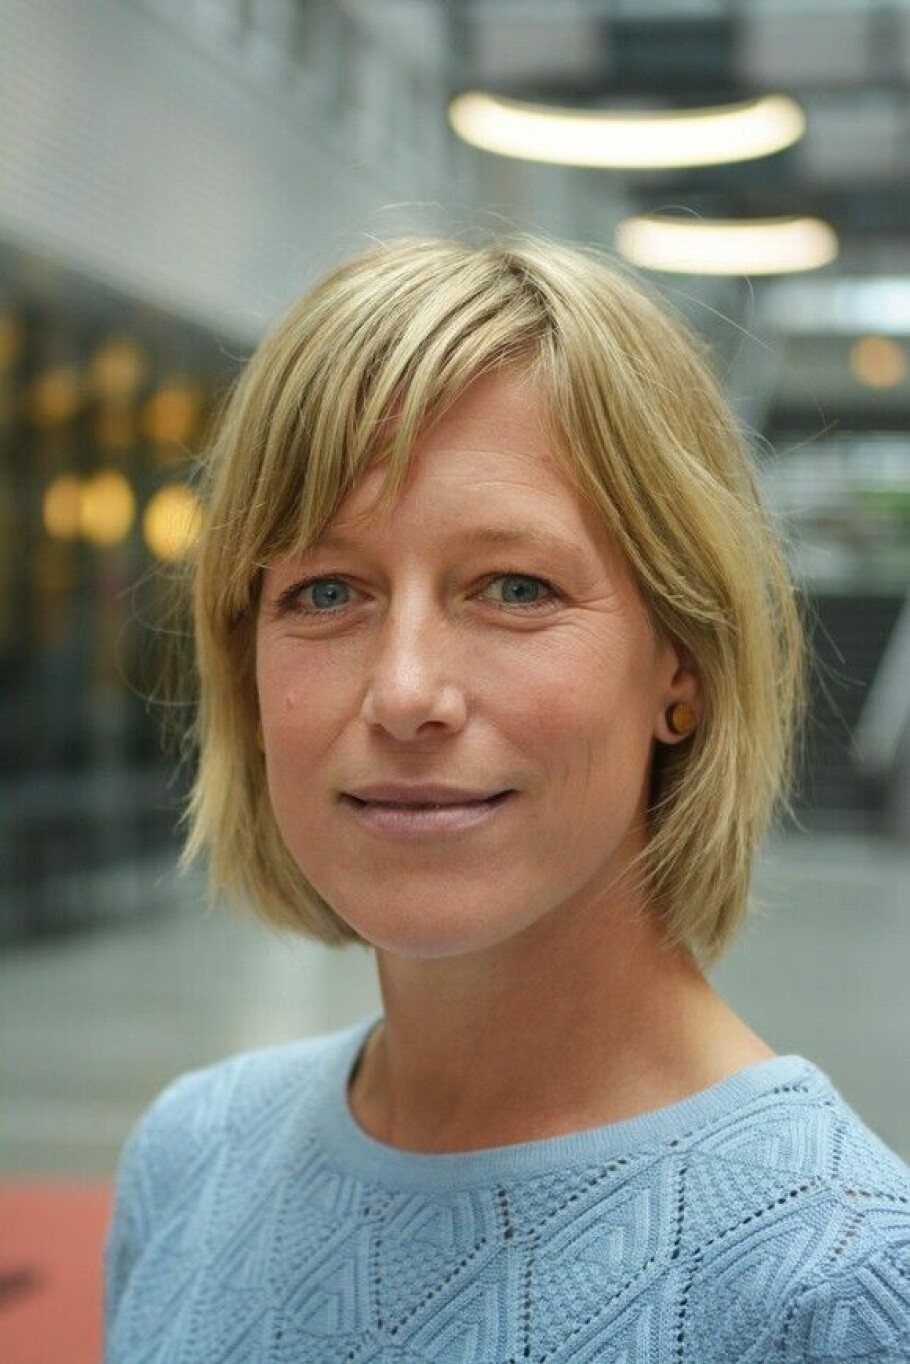 Carina Ribe Fernee is a researcher at the R&D centre of Sørlandet hospital. (Photo: UiA)